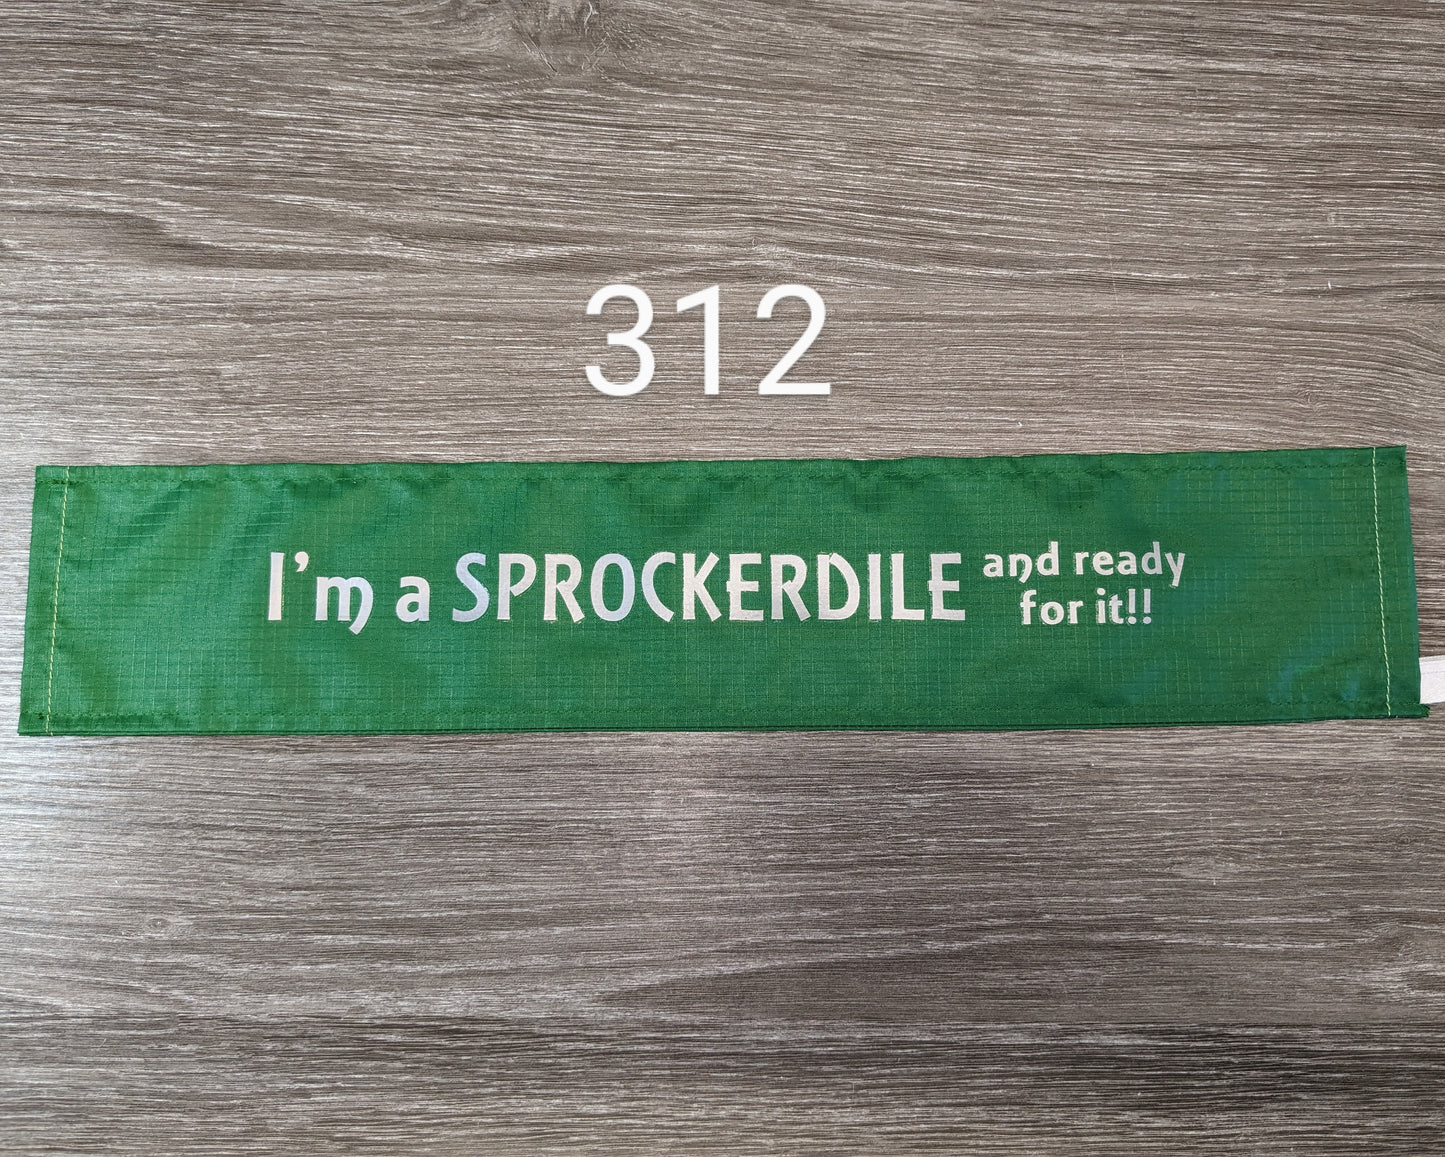 NOW HALF PRICE ! 312 "I'M A SPROCKERDILE and ready for it!!" Emerald Green Lead Sleeve. Humorous slogan for lively Sprocker! Cover for dog leash. Humourous!